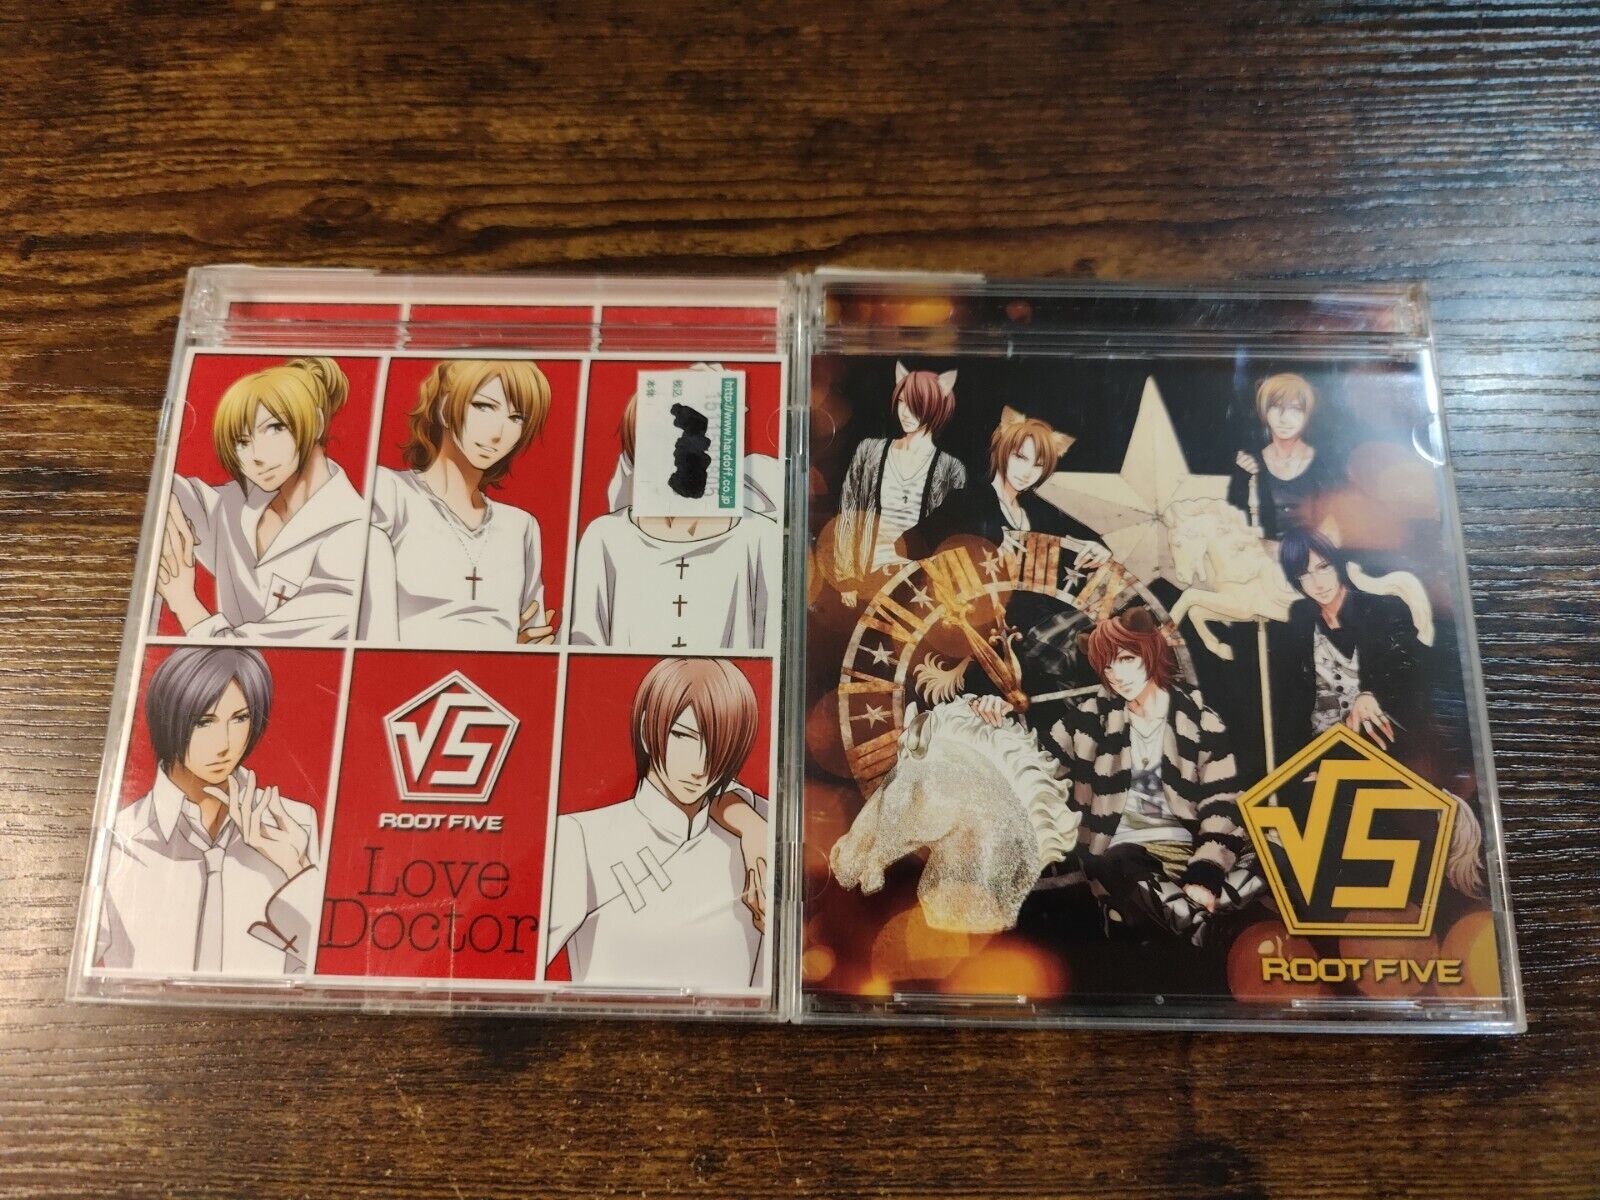 Lot Of 2 Japanese Anime CDs: Merry Go Round & Love Doctor By Root Five